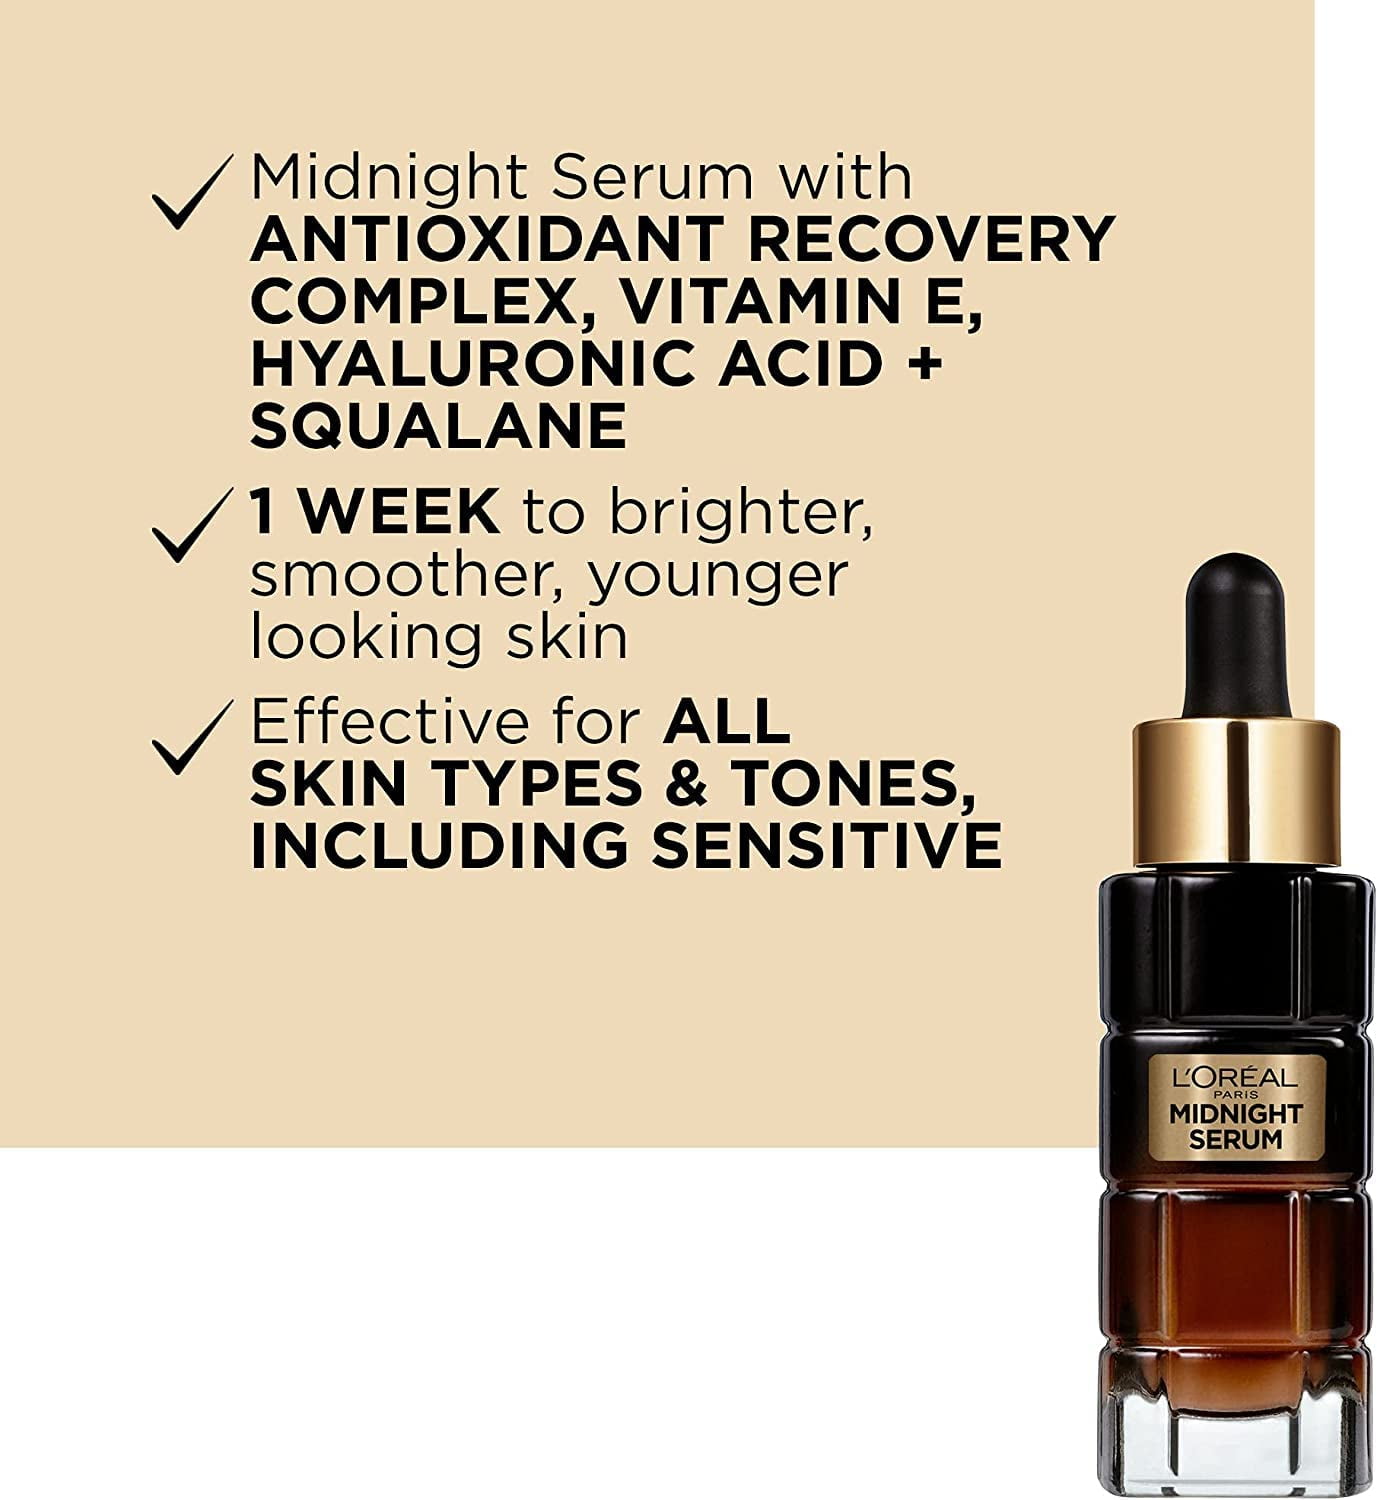 L'Oréal Paris Caribbean - Our L'Oréalistas are LOVING our Age Perfect  Midnight Serum! 😍 Of course, what's not to like? This serum is formulated  with a powerful antioxidant recovery complex, vitamin E